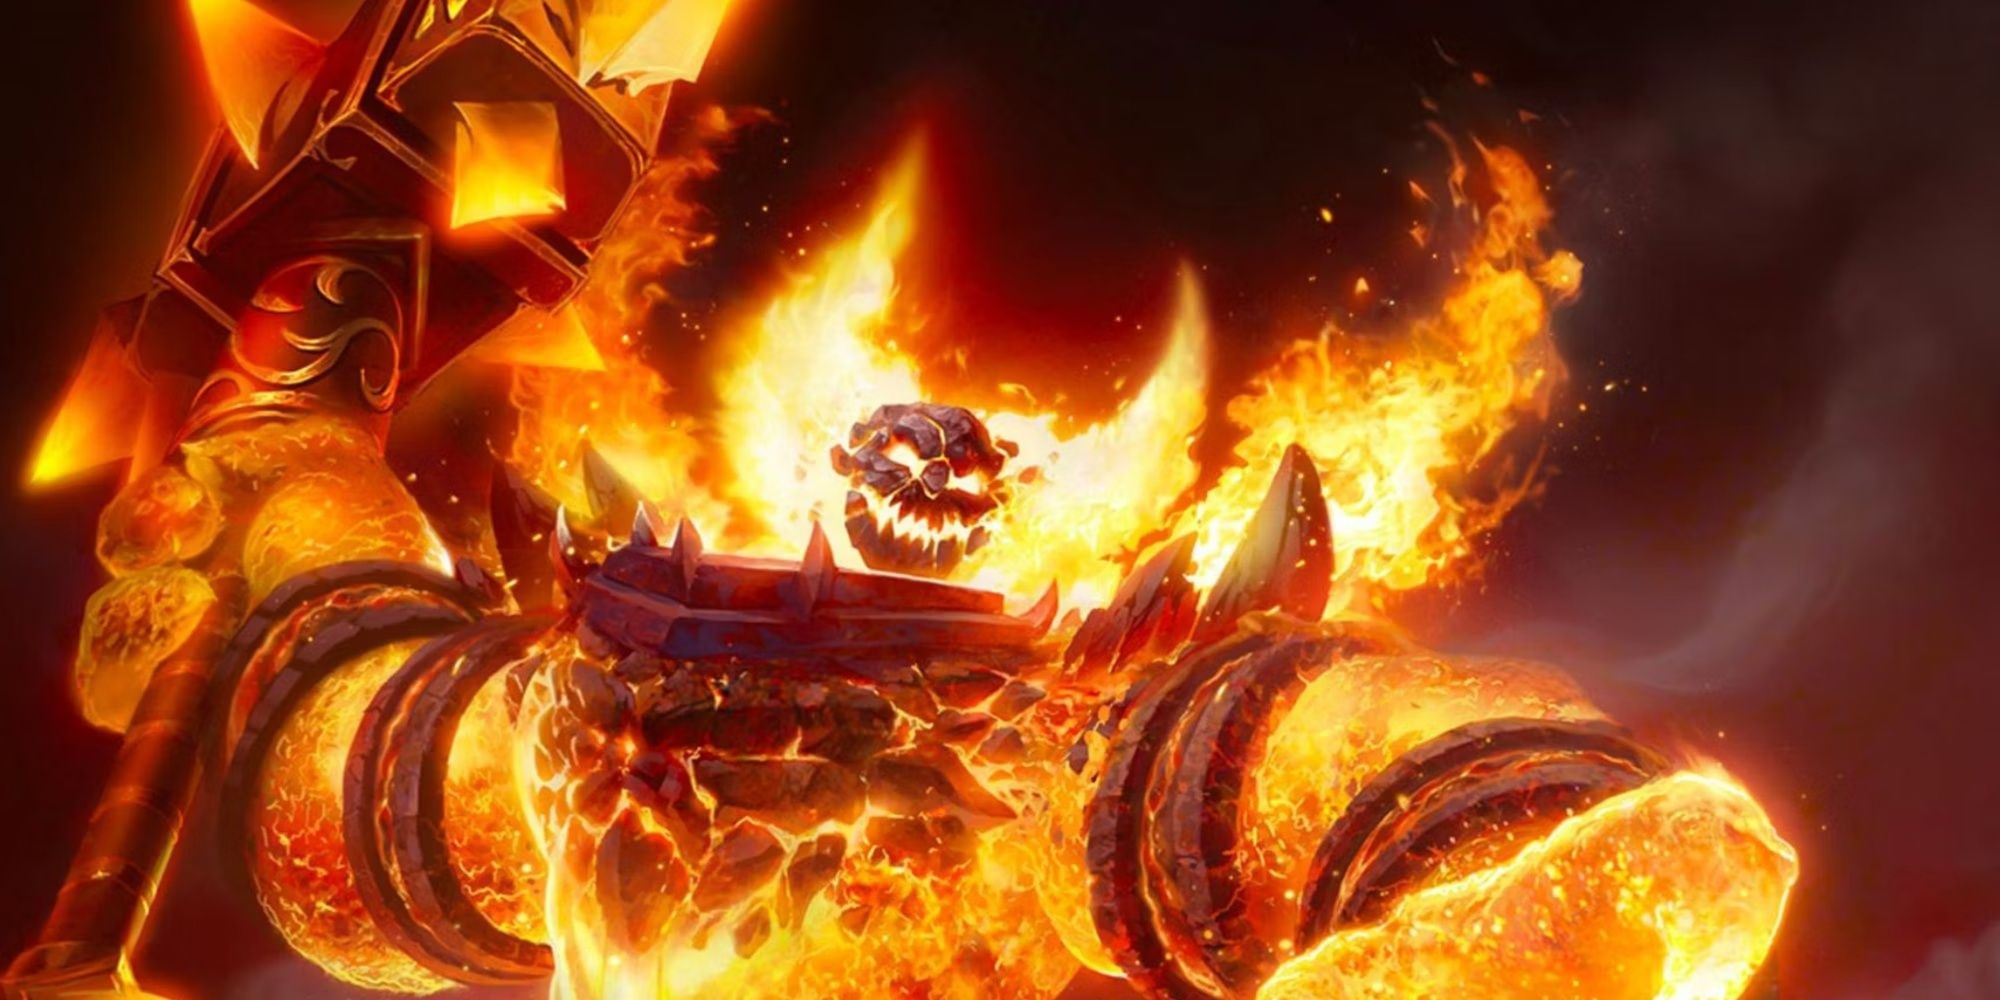 A flaming skeleton character from World of Warcraft Classic